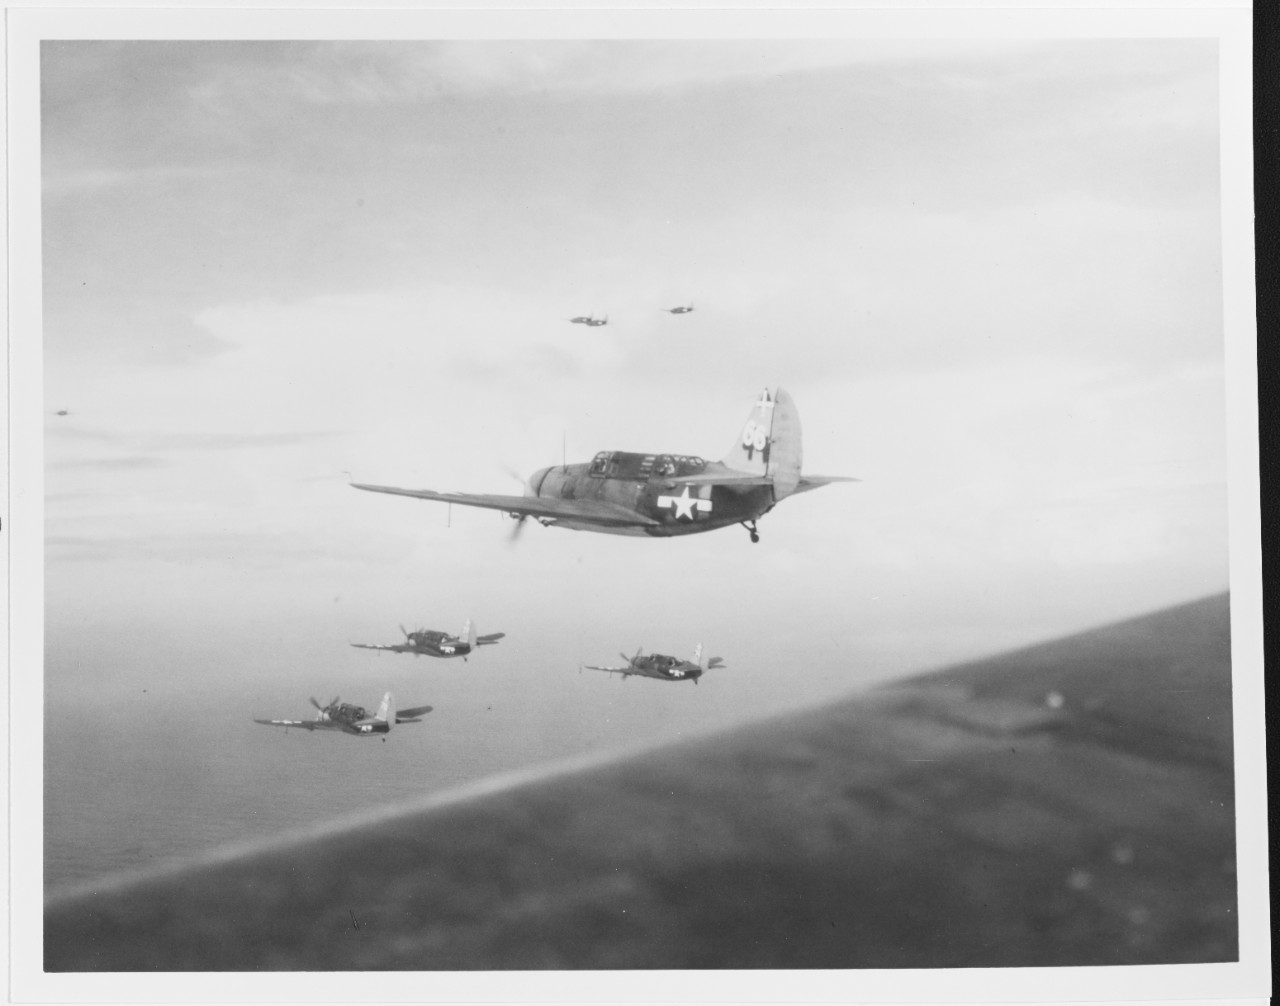 CURTISS SB2C-3 Bombers of VB-18 on patrol over the Philippine Sea, 15 November 1944